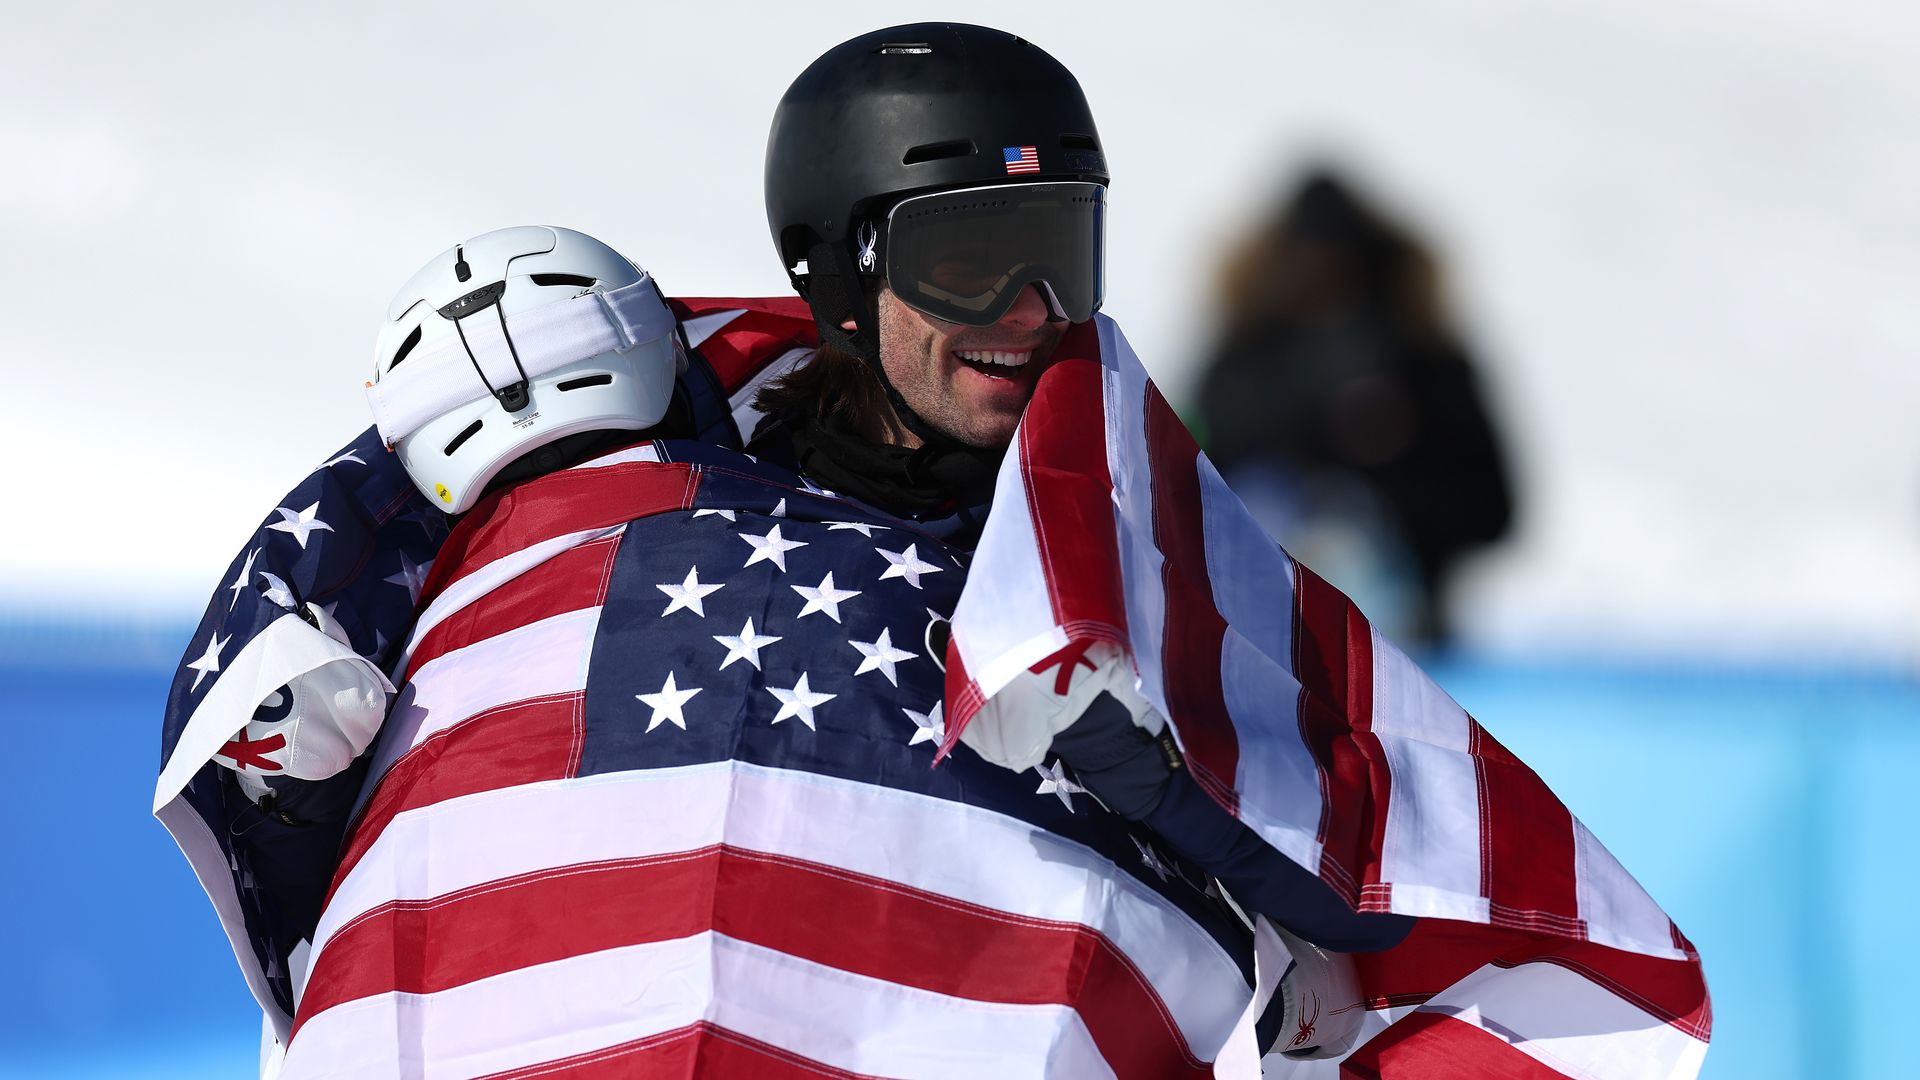 Gold medallist Alexander Hall (R) of Team USA embraces teammate and Silver medallist Nicholas Goepper during the Men's Freestyle Skiing Freeski Slopestyle Final  at the Winter Olympics